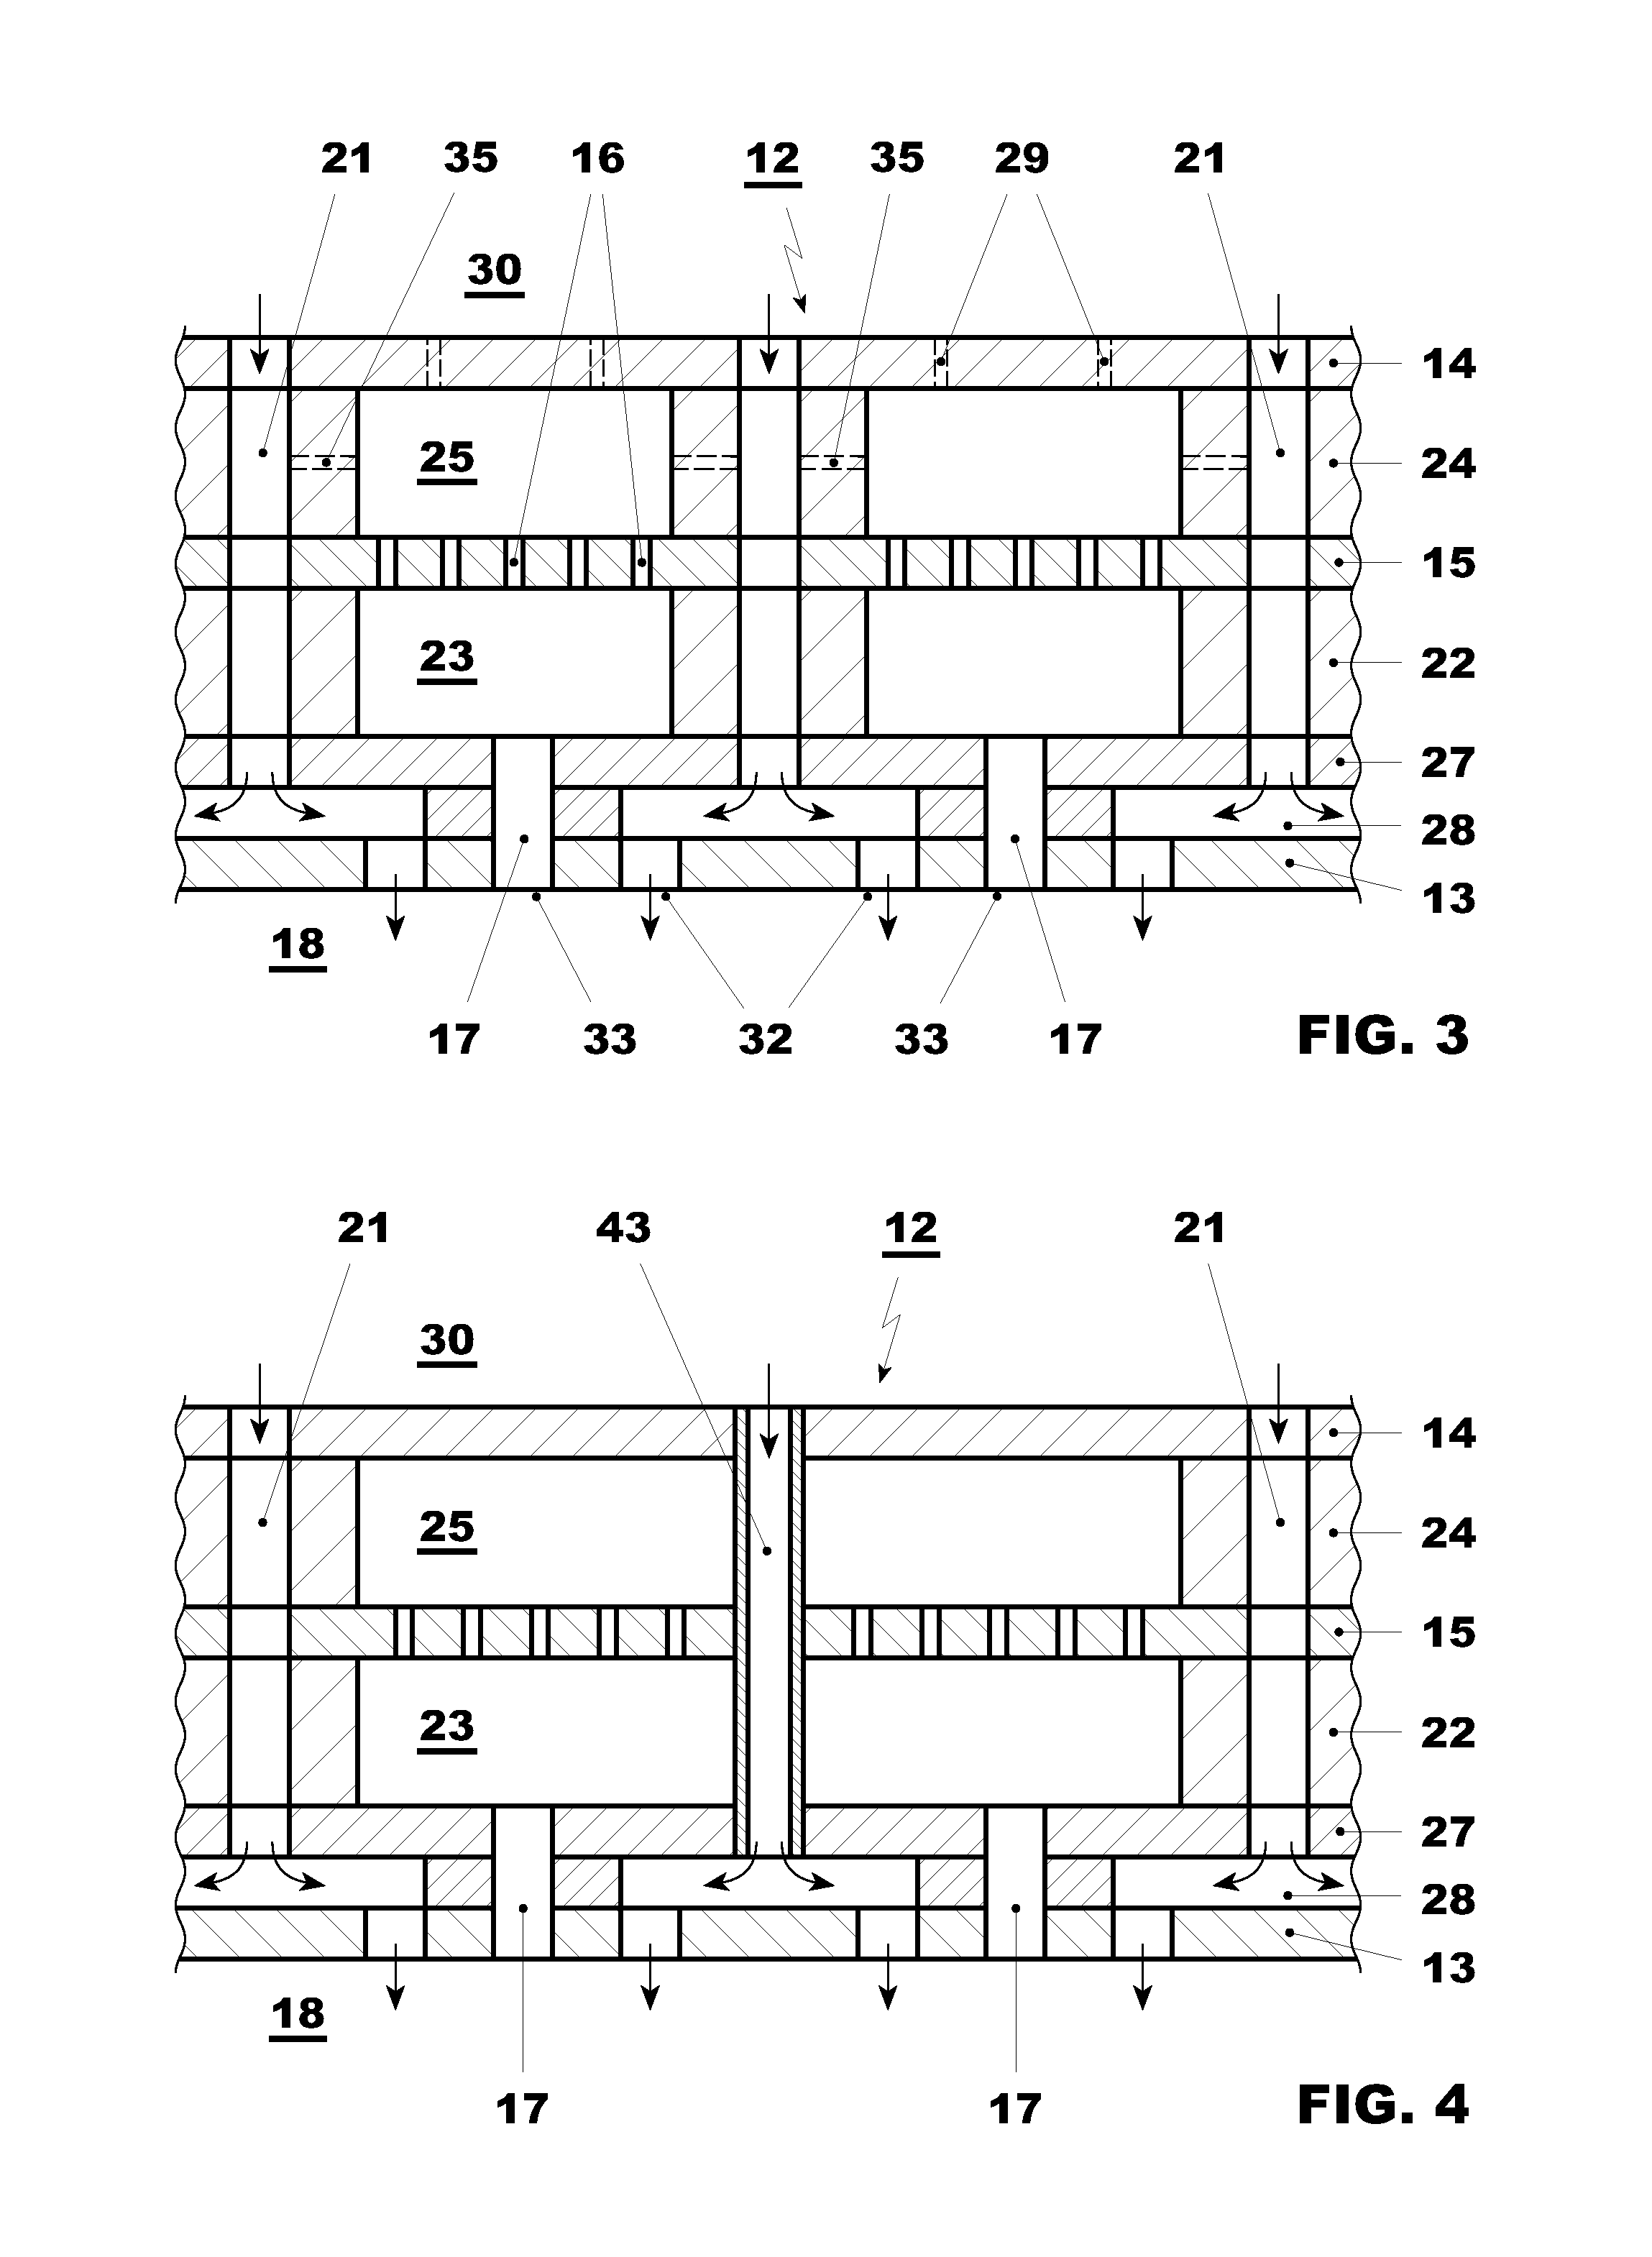 Combustion device for a gas turbine